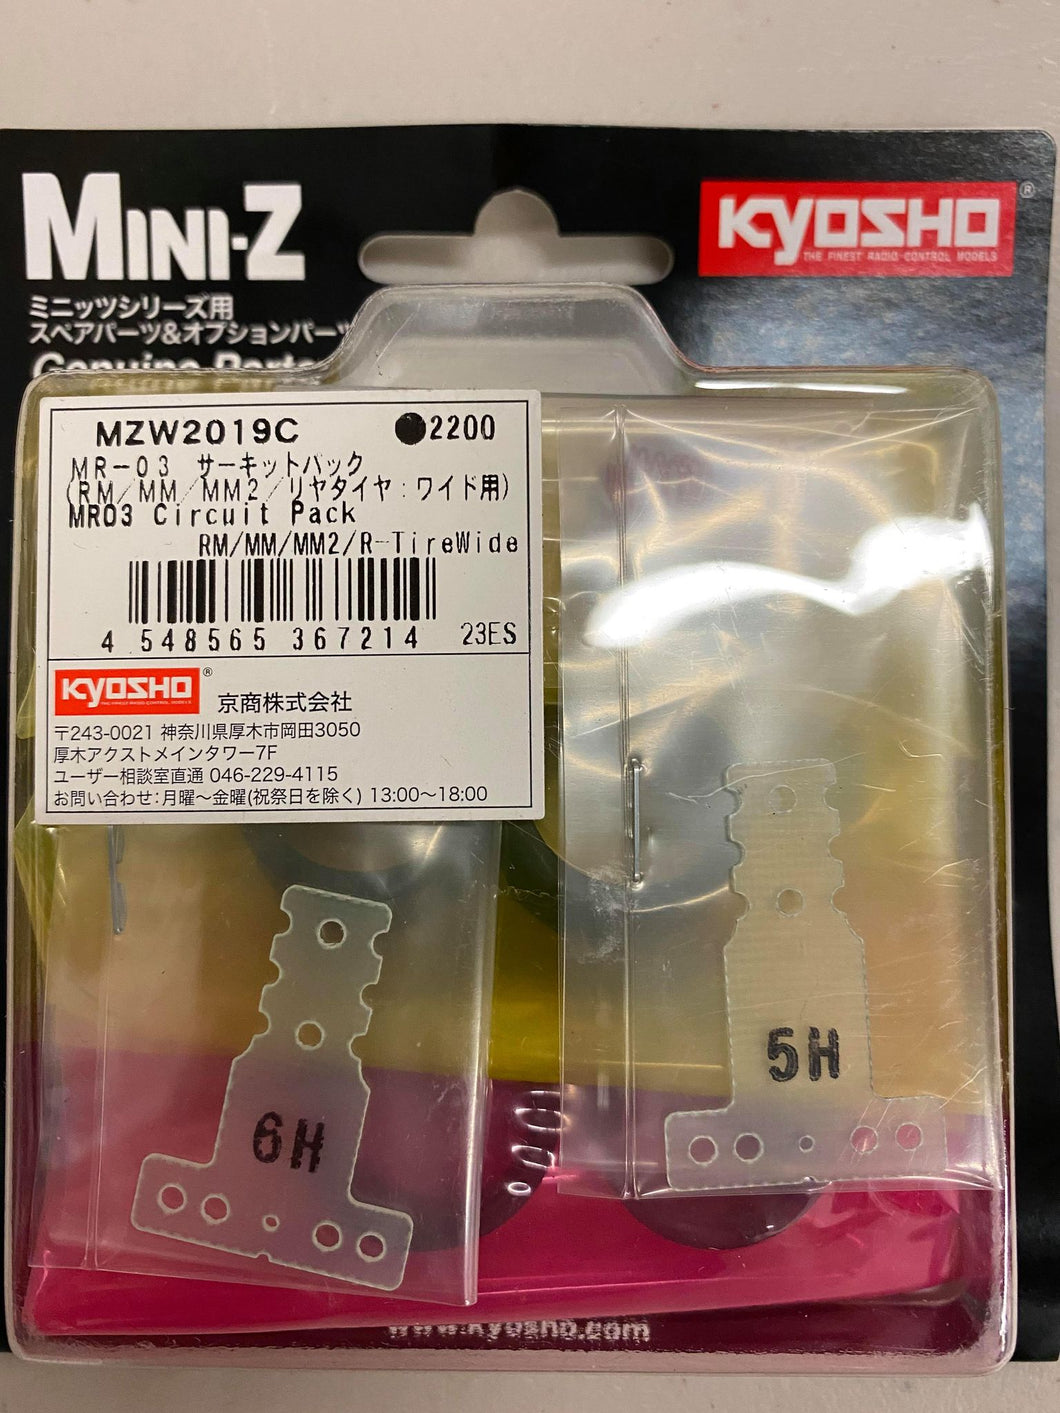 MZW2019C MR03 Circuit Pack(RM/MM/MM2/RearTireWide)